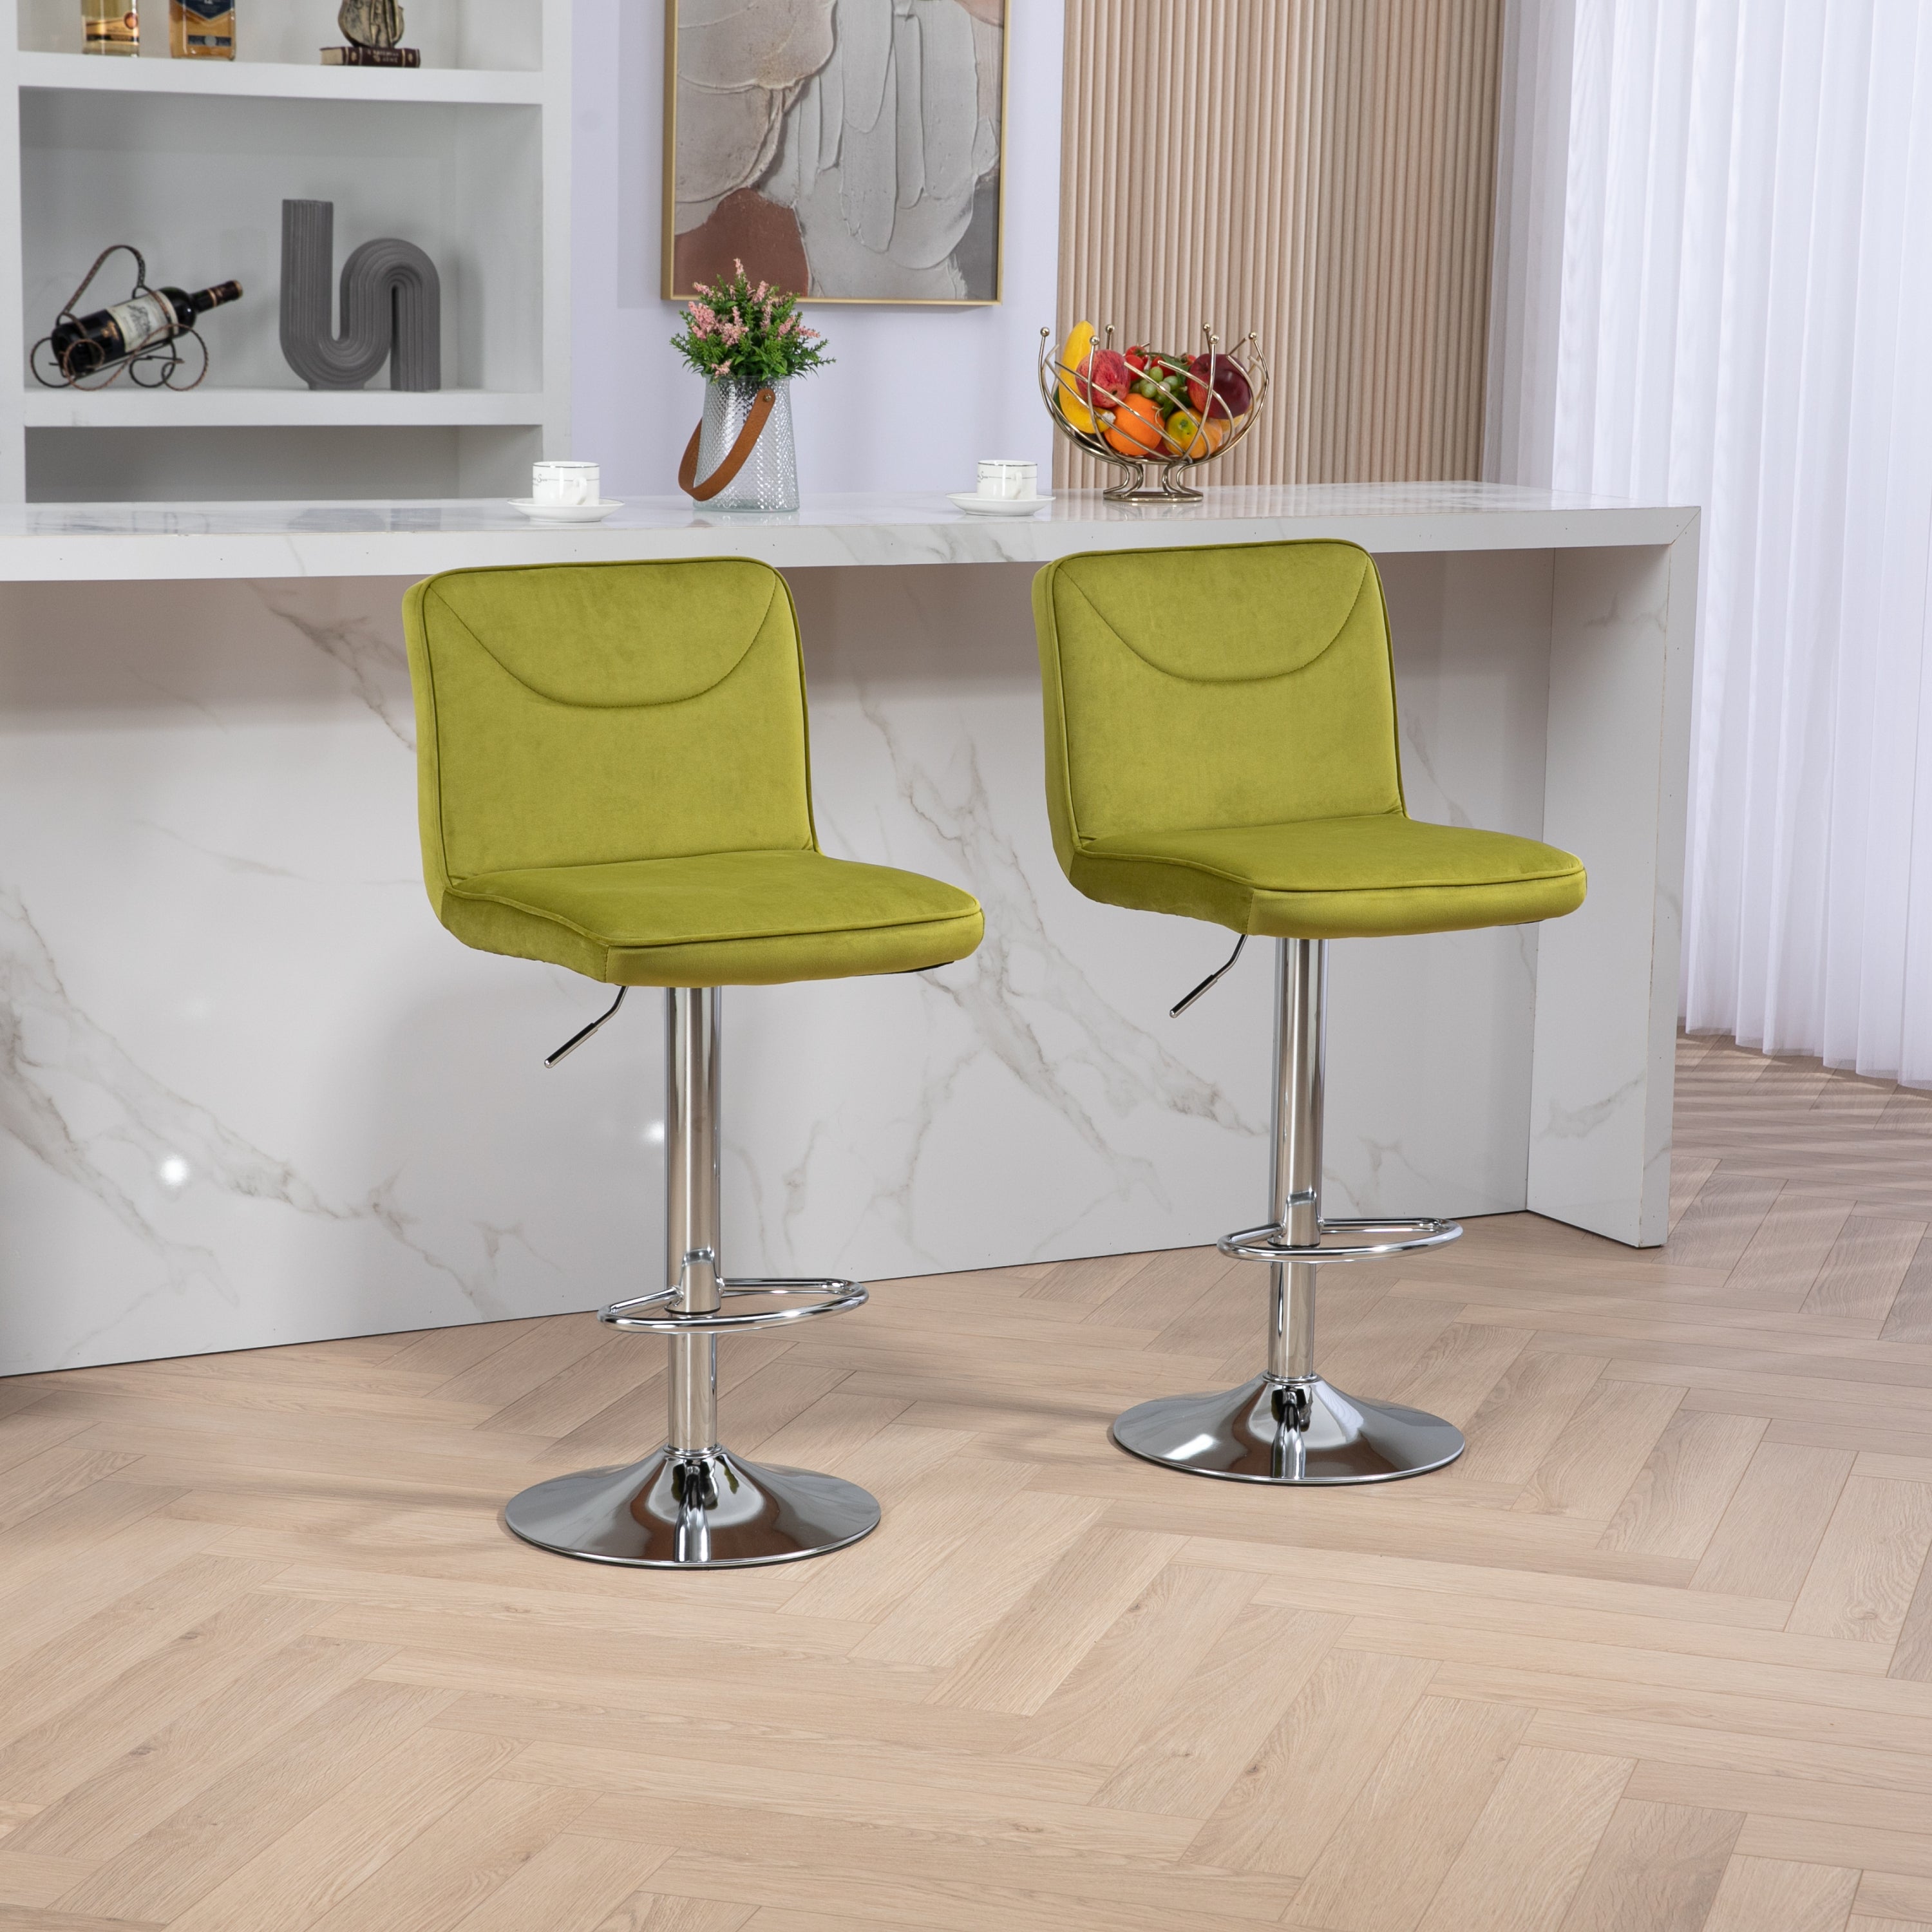 🆓🚛 Modern Swivel Bar stools Set of 2, Adjustable Counter Height Bar Chairs, with Backrest Footrest, Chrome Base, Olive Green